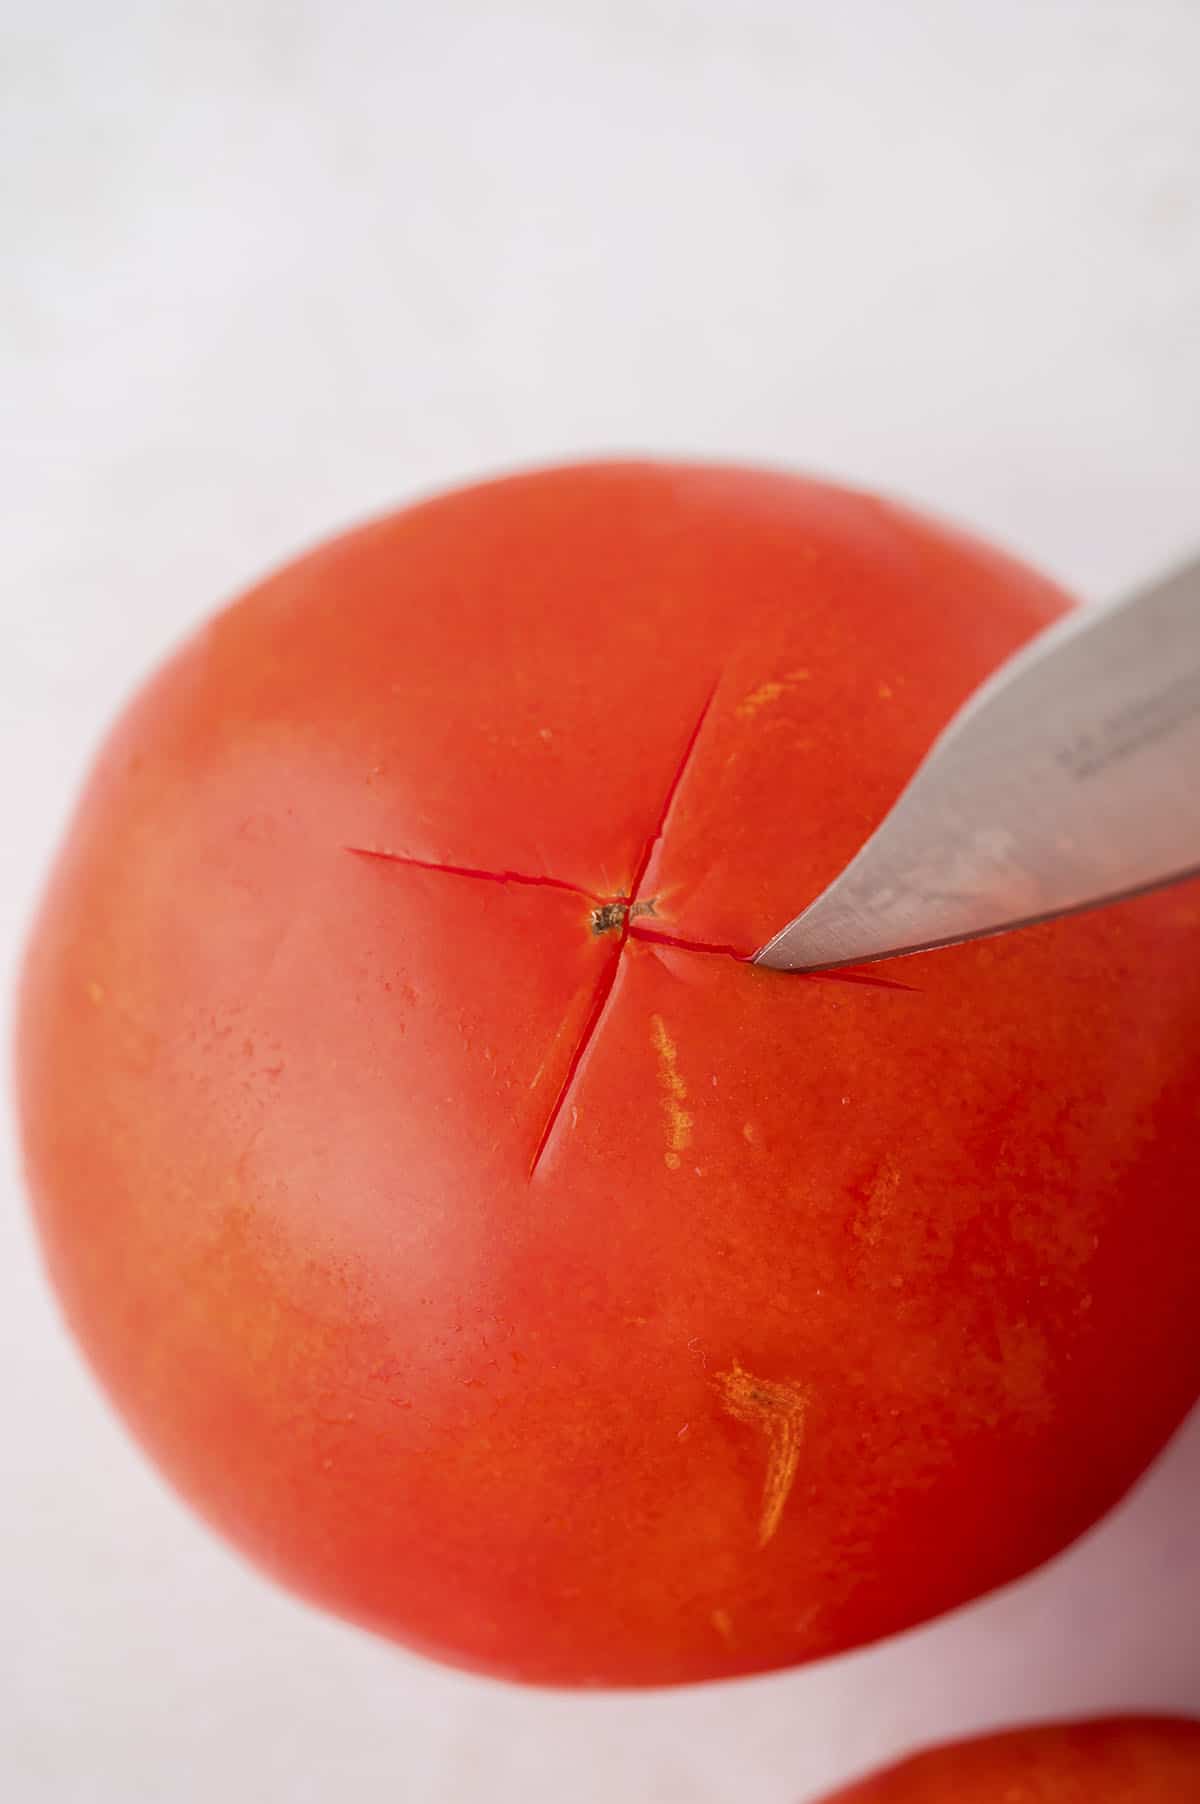 Knife cutting an 'x' into a tomato.